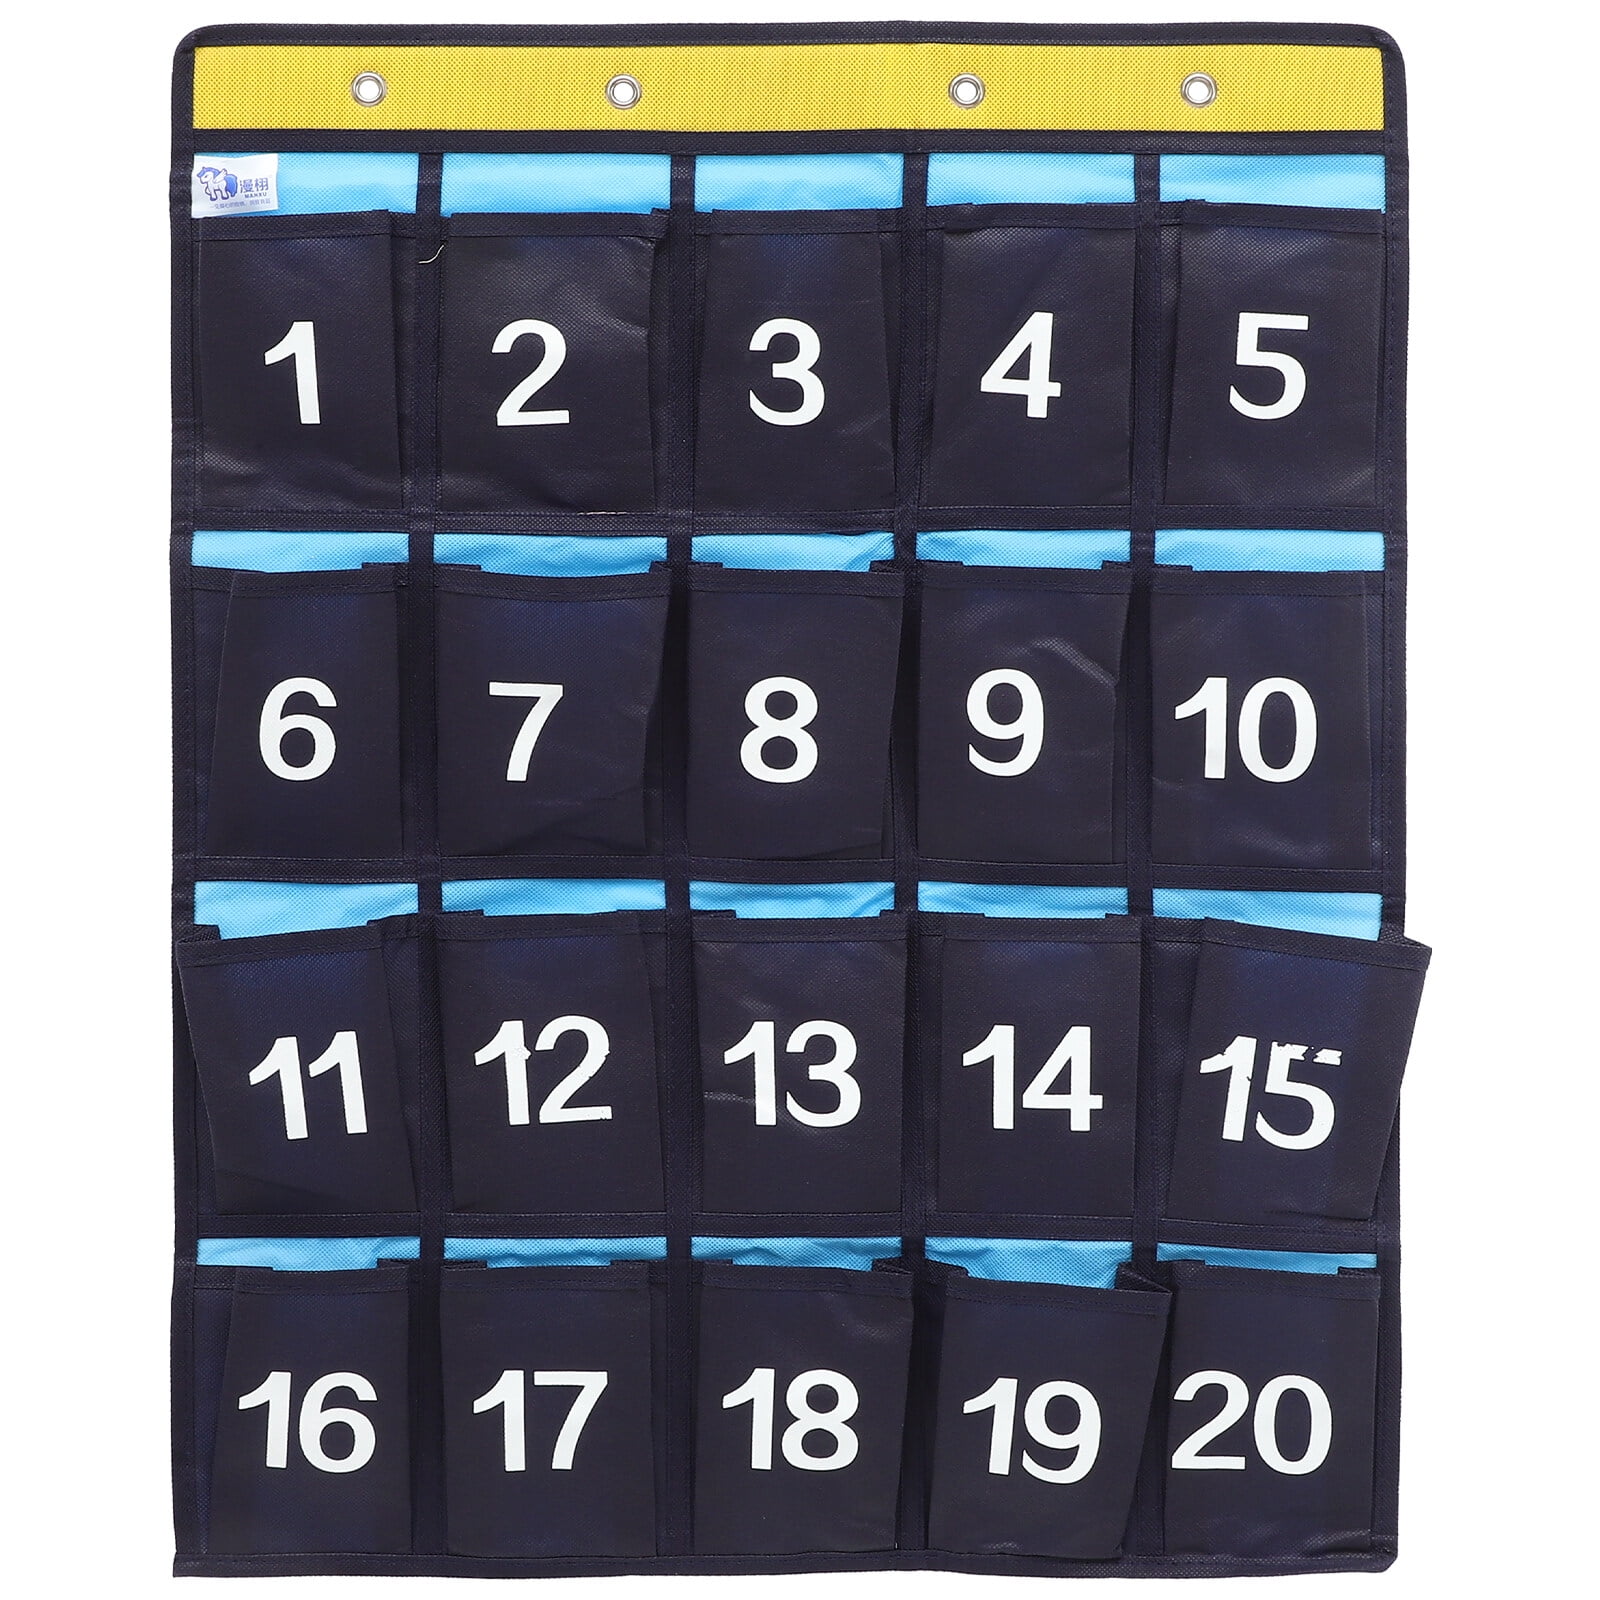 HTVRONT Vinyl Roll Holder with 24 Compartments Wall Mount/Hanging